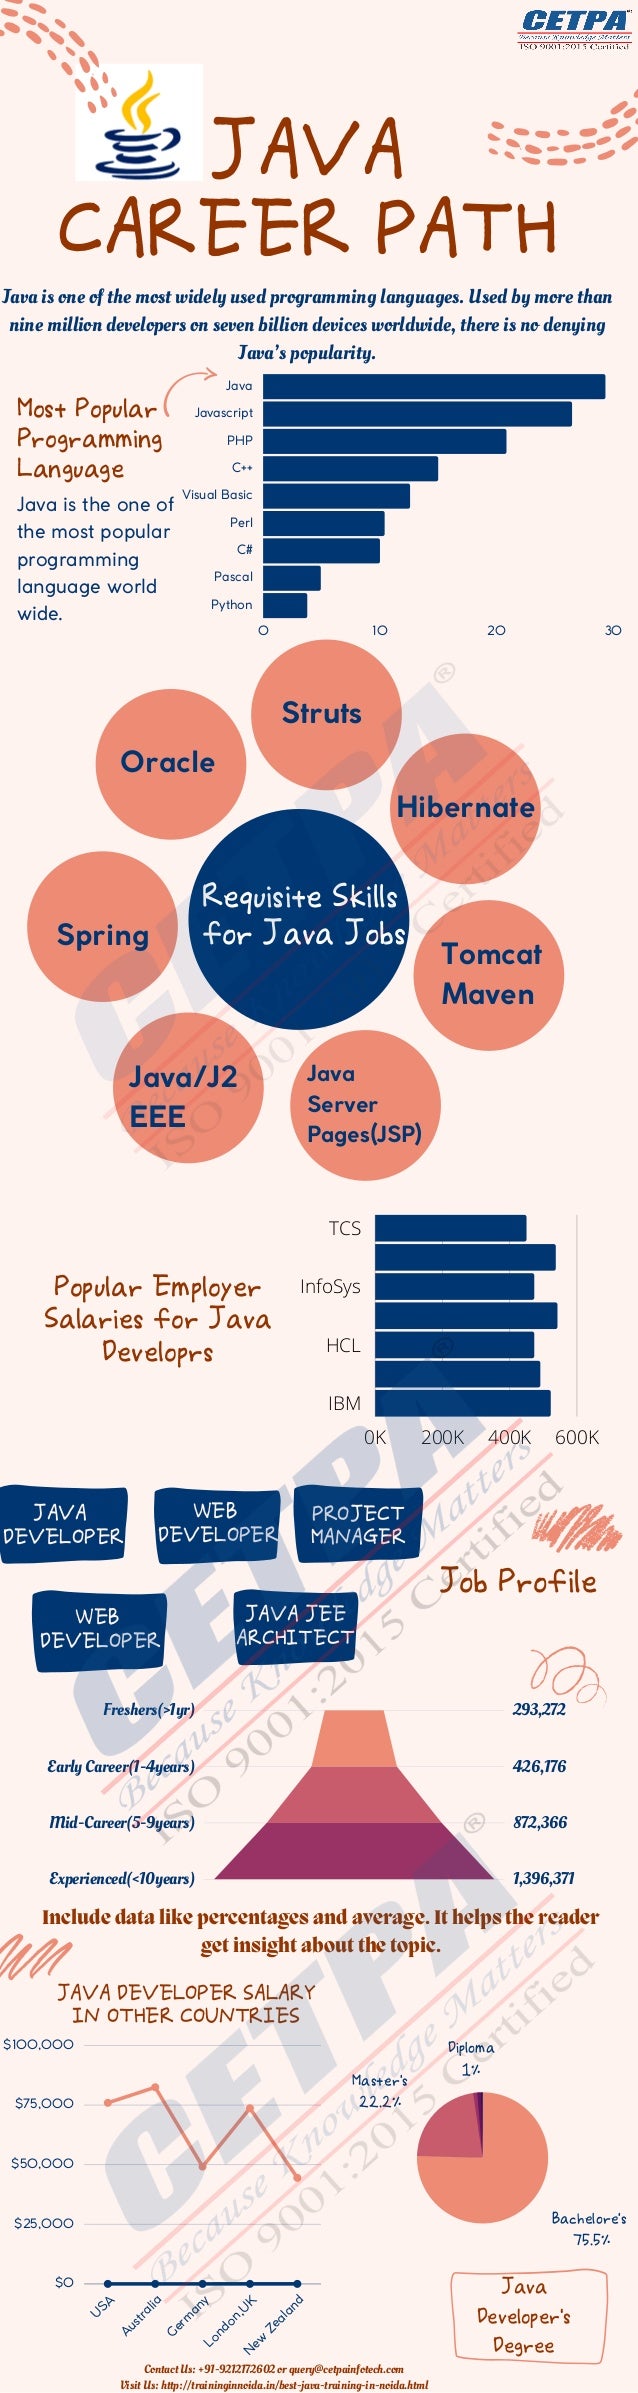 0 10 20 30
Java
Javascript
PHP
C++
Visual Basic
Perl
C#
Pascal
Python
Freshers(>1yr)
Early Career(1-4years)
Mid-Career(5-9years)
Experienced(<10years)
293,272
426,176
872,366
1,396,371
U
S
A
A
u
s
t
r
a
l
i
a
G
e
r
m
a
n
y
L
o
n
d
o
n
,
U
K
N
e
w
Z
e
a
l
a
n
d
$100,000
$75,000
$50,000
$25,000
$0
Job Profile
0K 200K 400K 600K
TCS
InfoSys
HCL
IBM
PROJECT
MANAGER
Bachelore's
75.5%
Master's
22.2%
Diploma
1%
JAVA
CAREER PATH
Java is one of the most widely used programming languages. Used by more than
nine million developers on seven billion devices worldwide, there is no denying
Java’s popularity.
JAVA
DEVELOPER
Include data like percentages and average. It helps the reader
get insight about the topic.
Most Popular
Programming
Language
Java is the one of
the most popular
programming
language world
wide.
Java
Developer's
Degree
JAVA DEVELOPER SALARY
IN OTHER COUNTRIES


Requisite Skills
for Java Jobs
Oracle
Hibernate
Tomcat
Maven
Java
Server
Pages(JSP)
Java/J2
EEE
Spring
Struts
Popular Employer
Salaries for Java
Developrs
WEB
DEVELOPER
JAVA JEE
ARCHITECT
WEB
DEVELOPER
Contact Us: +91-9212172602 or query@cetpainfotech.com
Visit Us: http://traininginnoida.in/best-java-training-in-noida.html
 